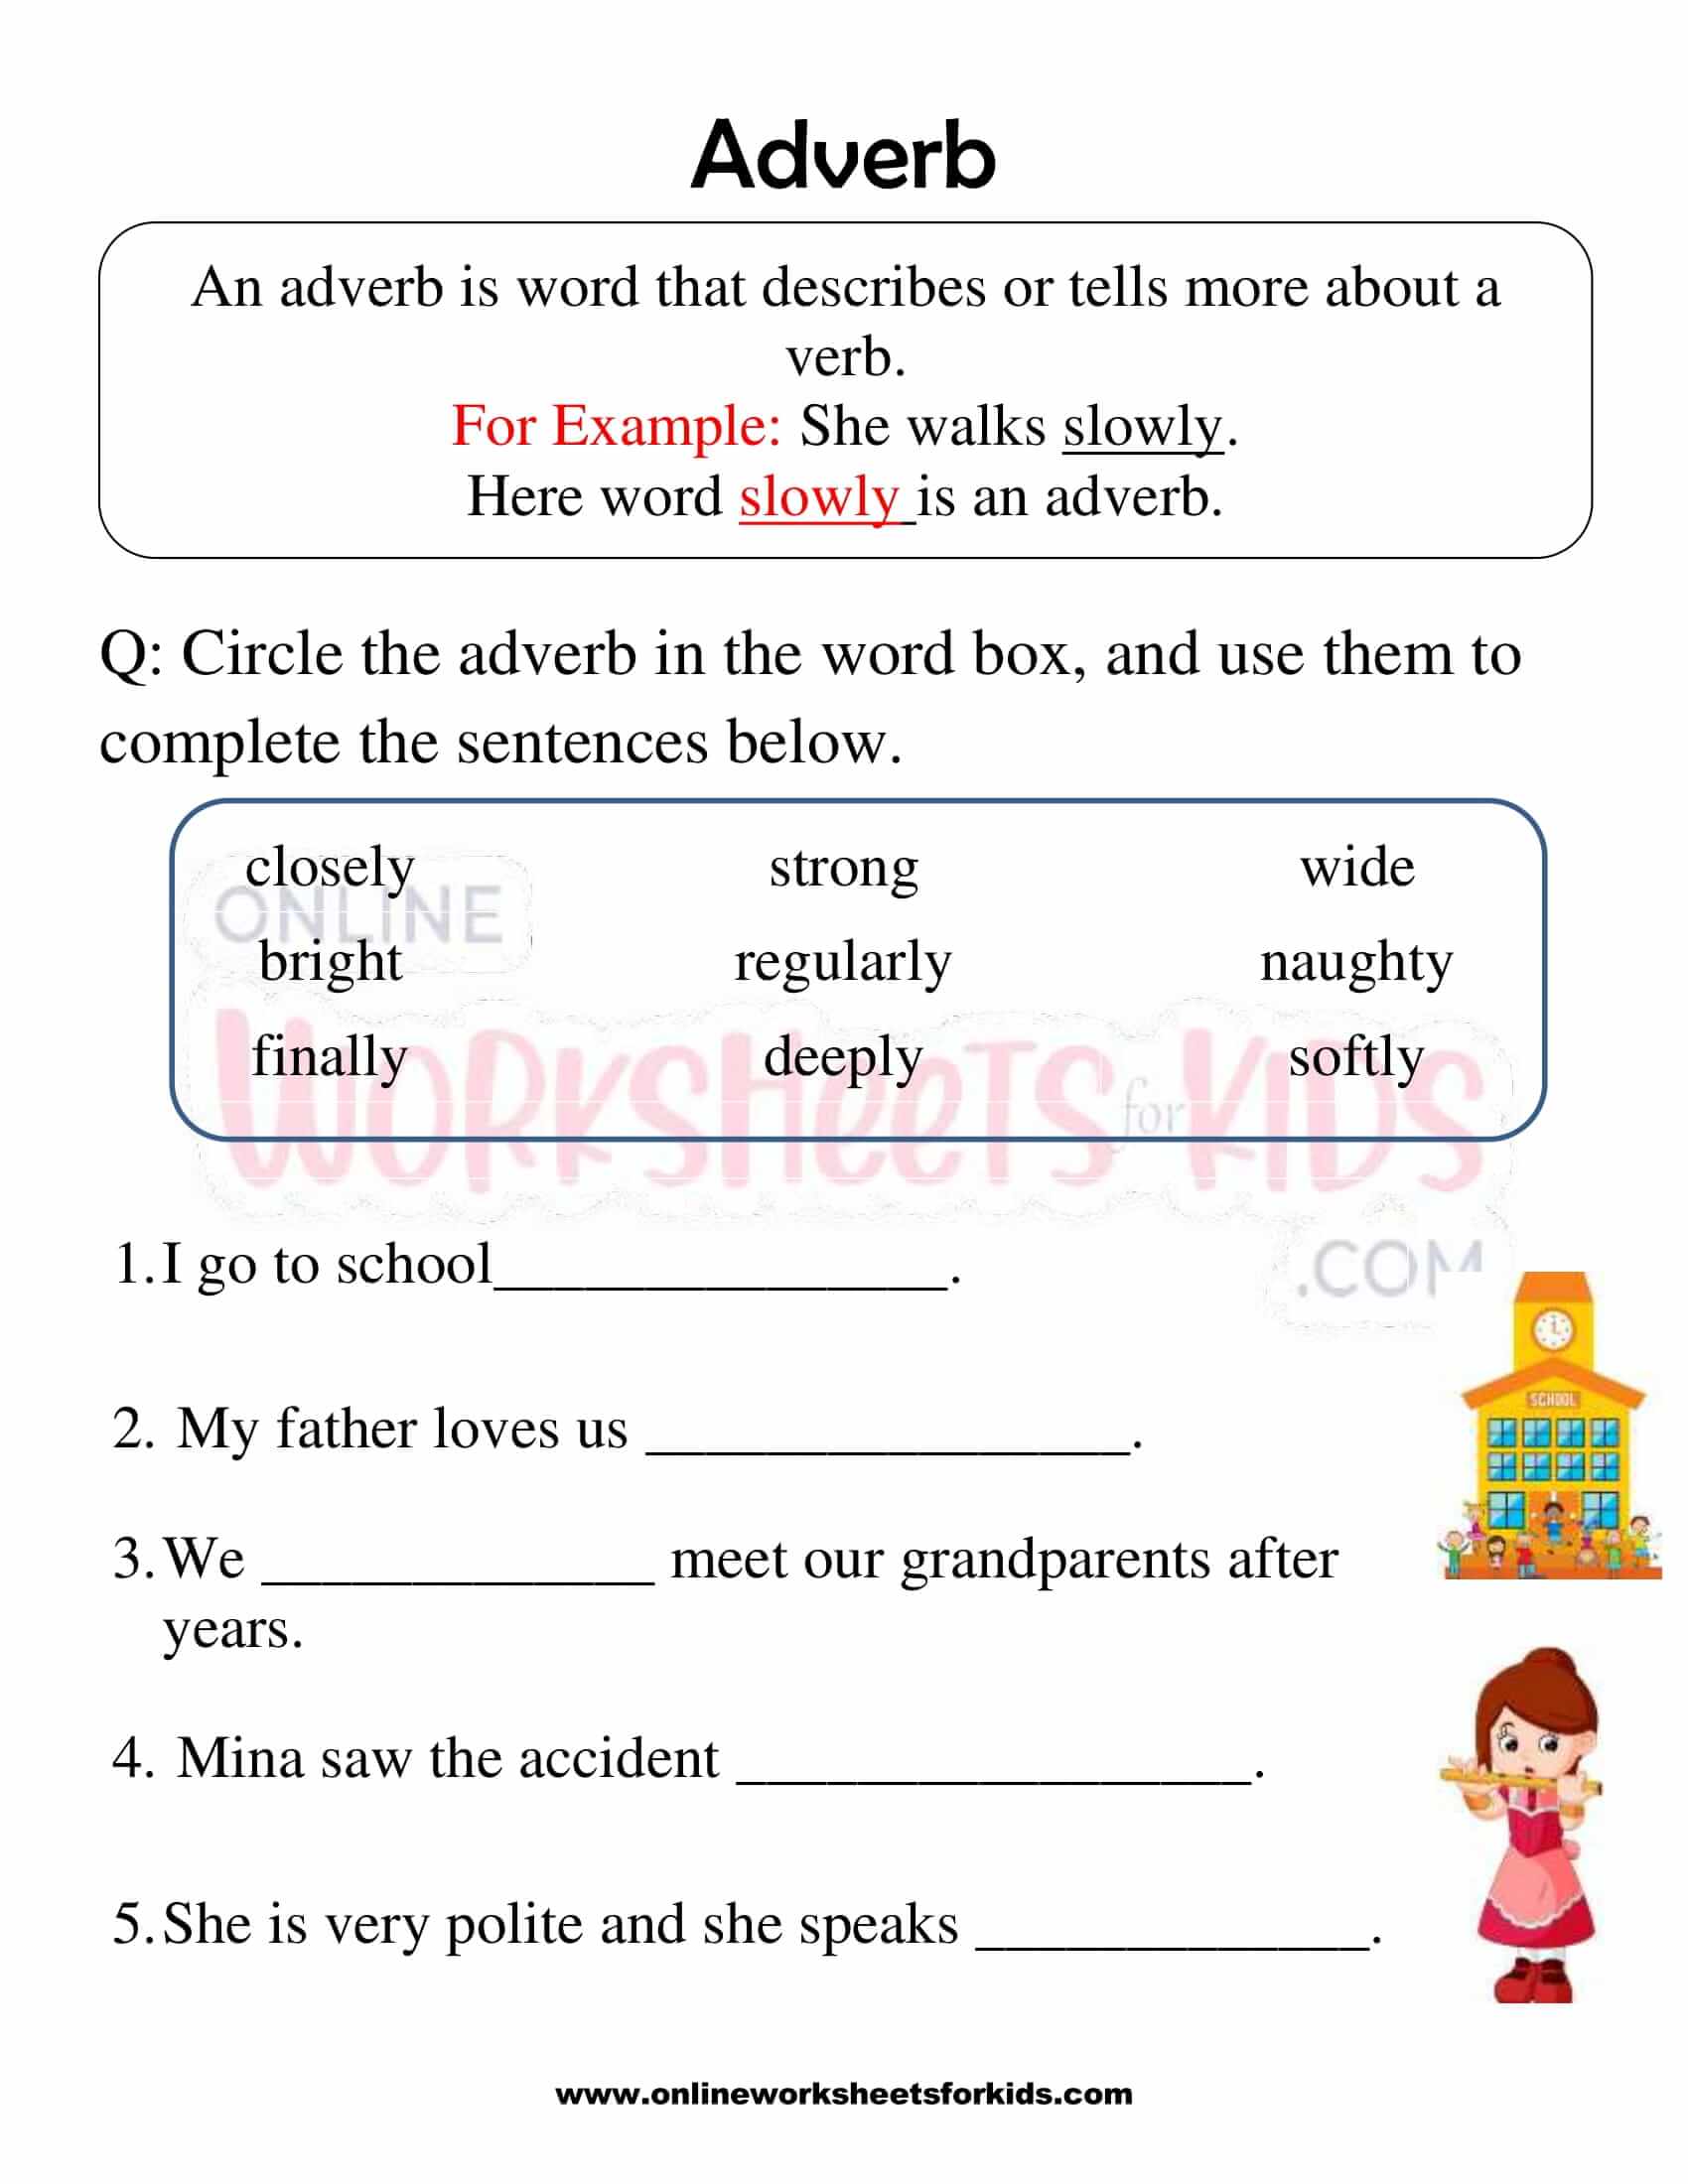 adverb-worksheets-for-elementary-school-printable-free-k5-learning-adverbs-worksheet-answer